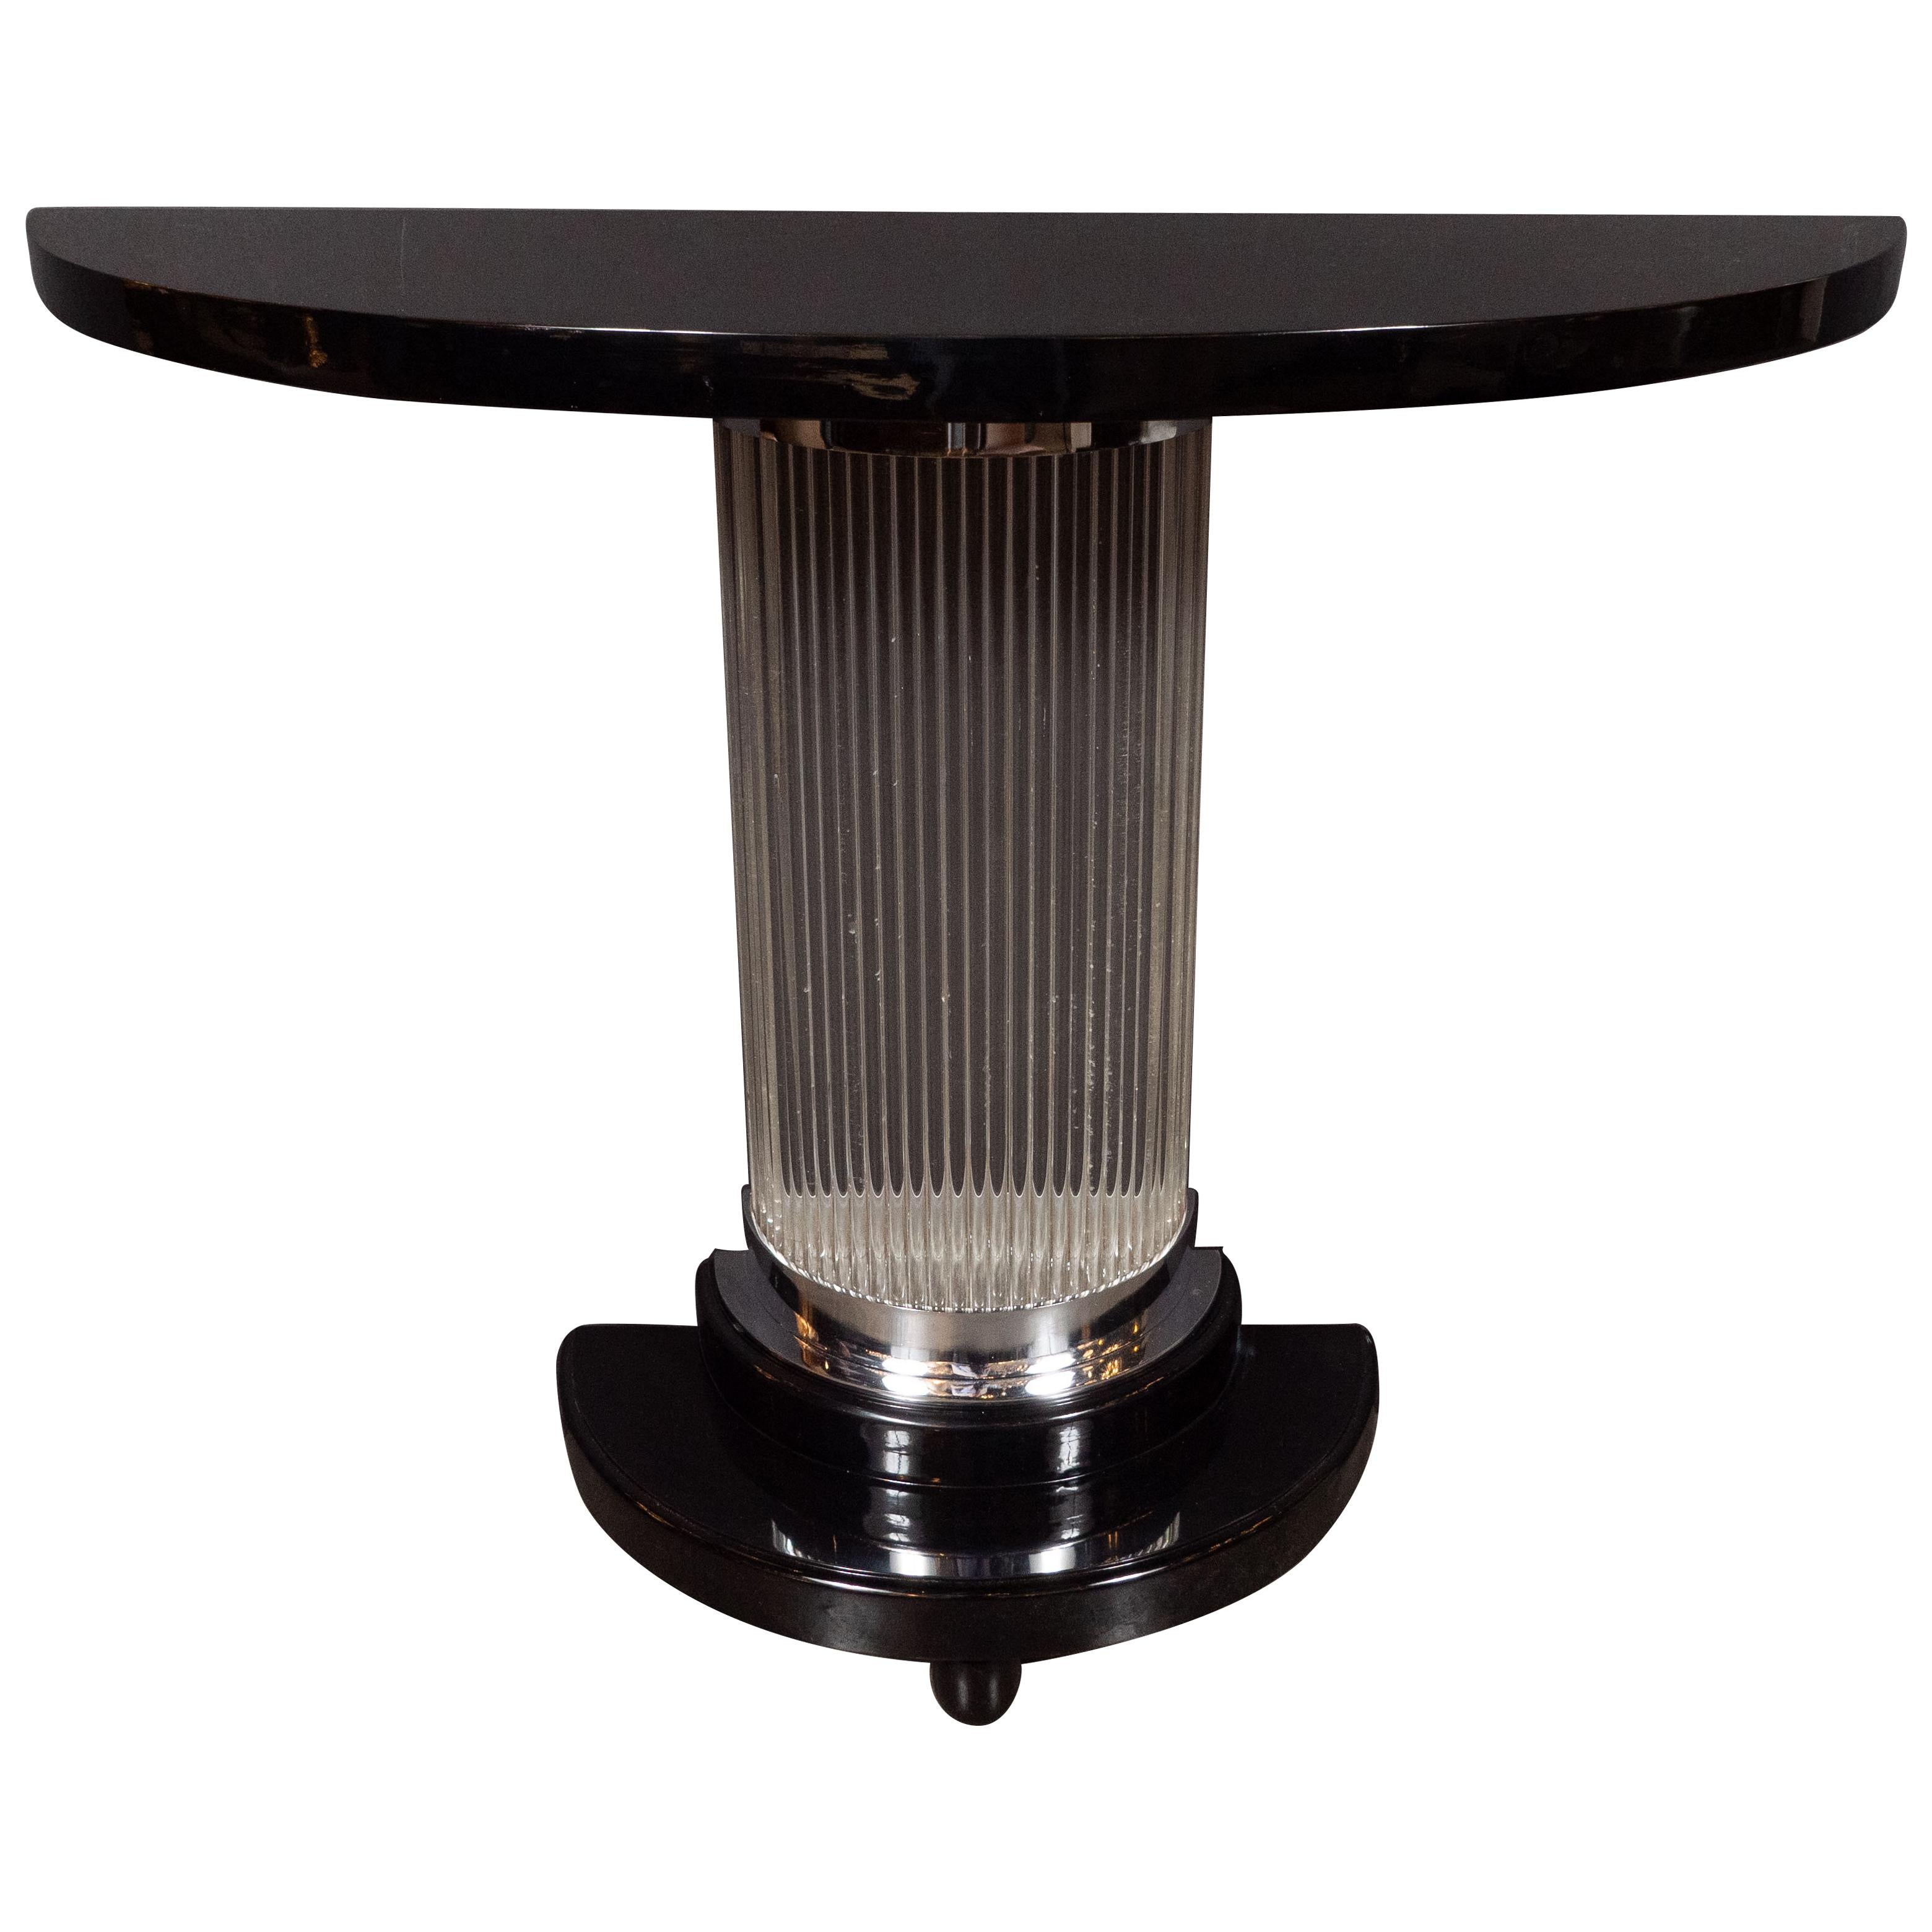 This stunning Art Deco Machine Age console table was realized in the United States, circa 1935. It features a streamlined demilune form black lacquer top with a stepped skyscraper style base of the same shape with chrome detailing and rounded